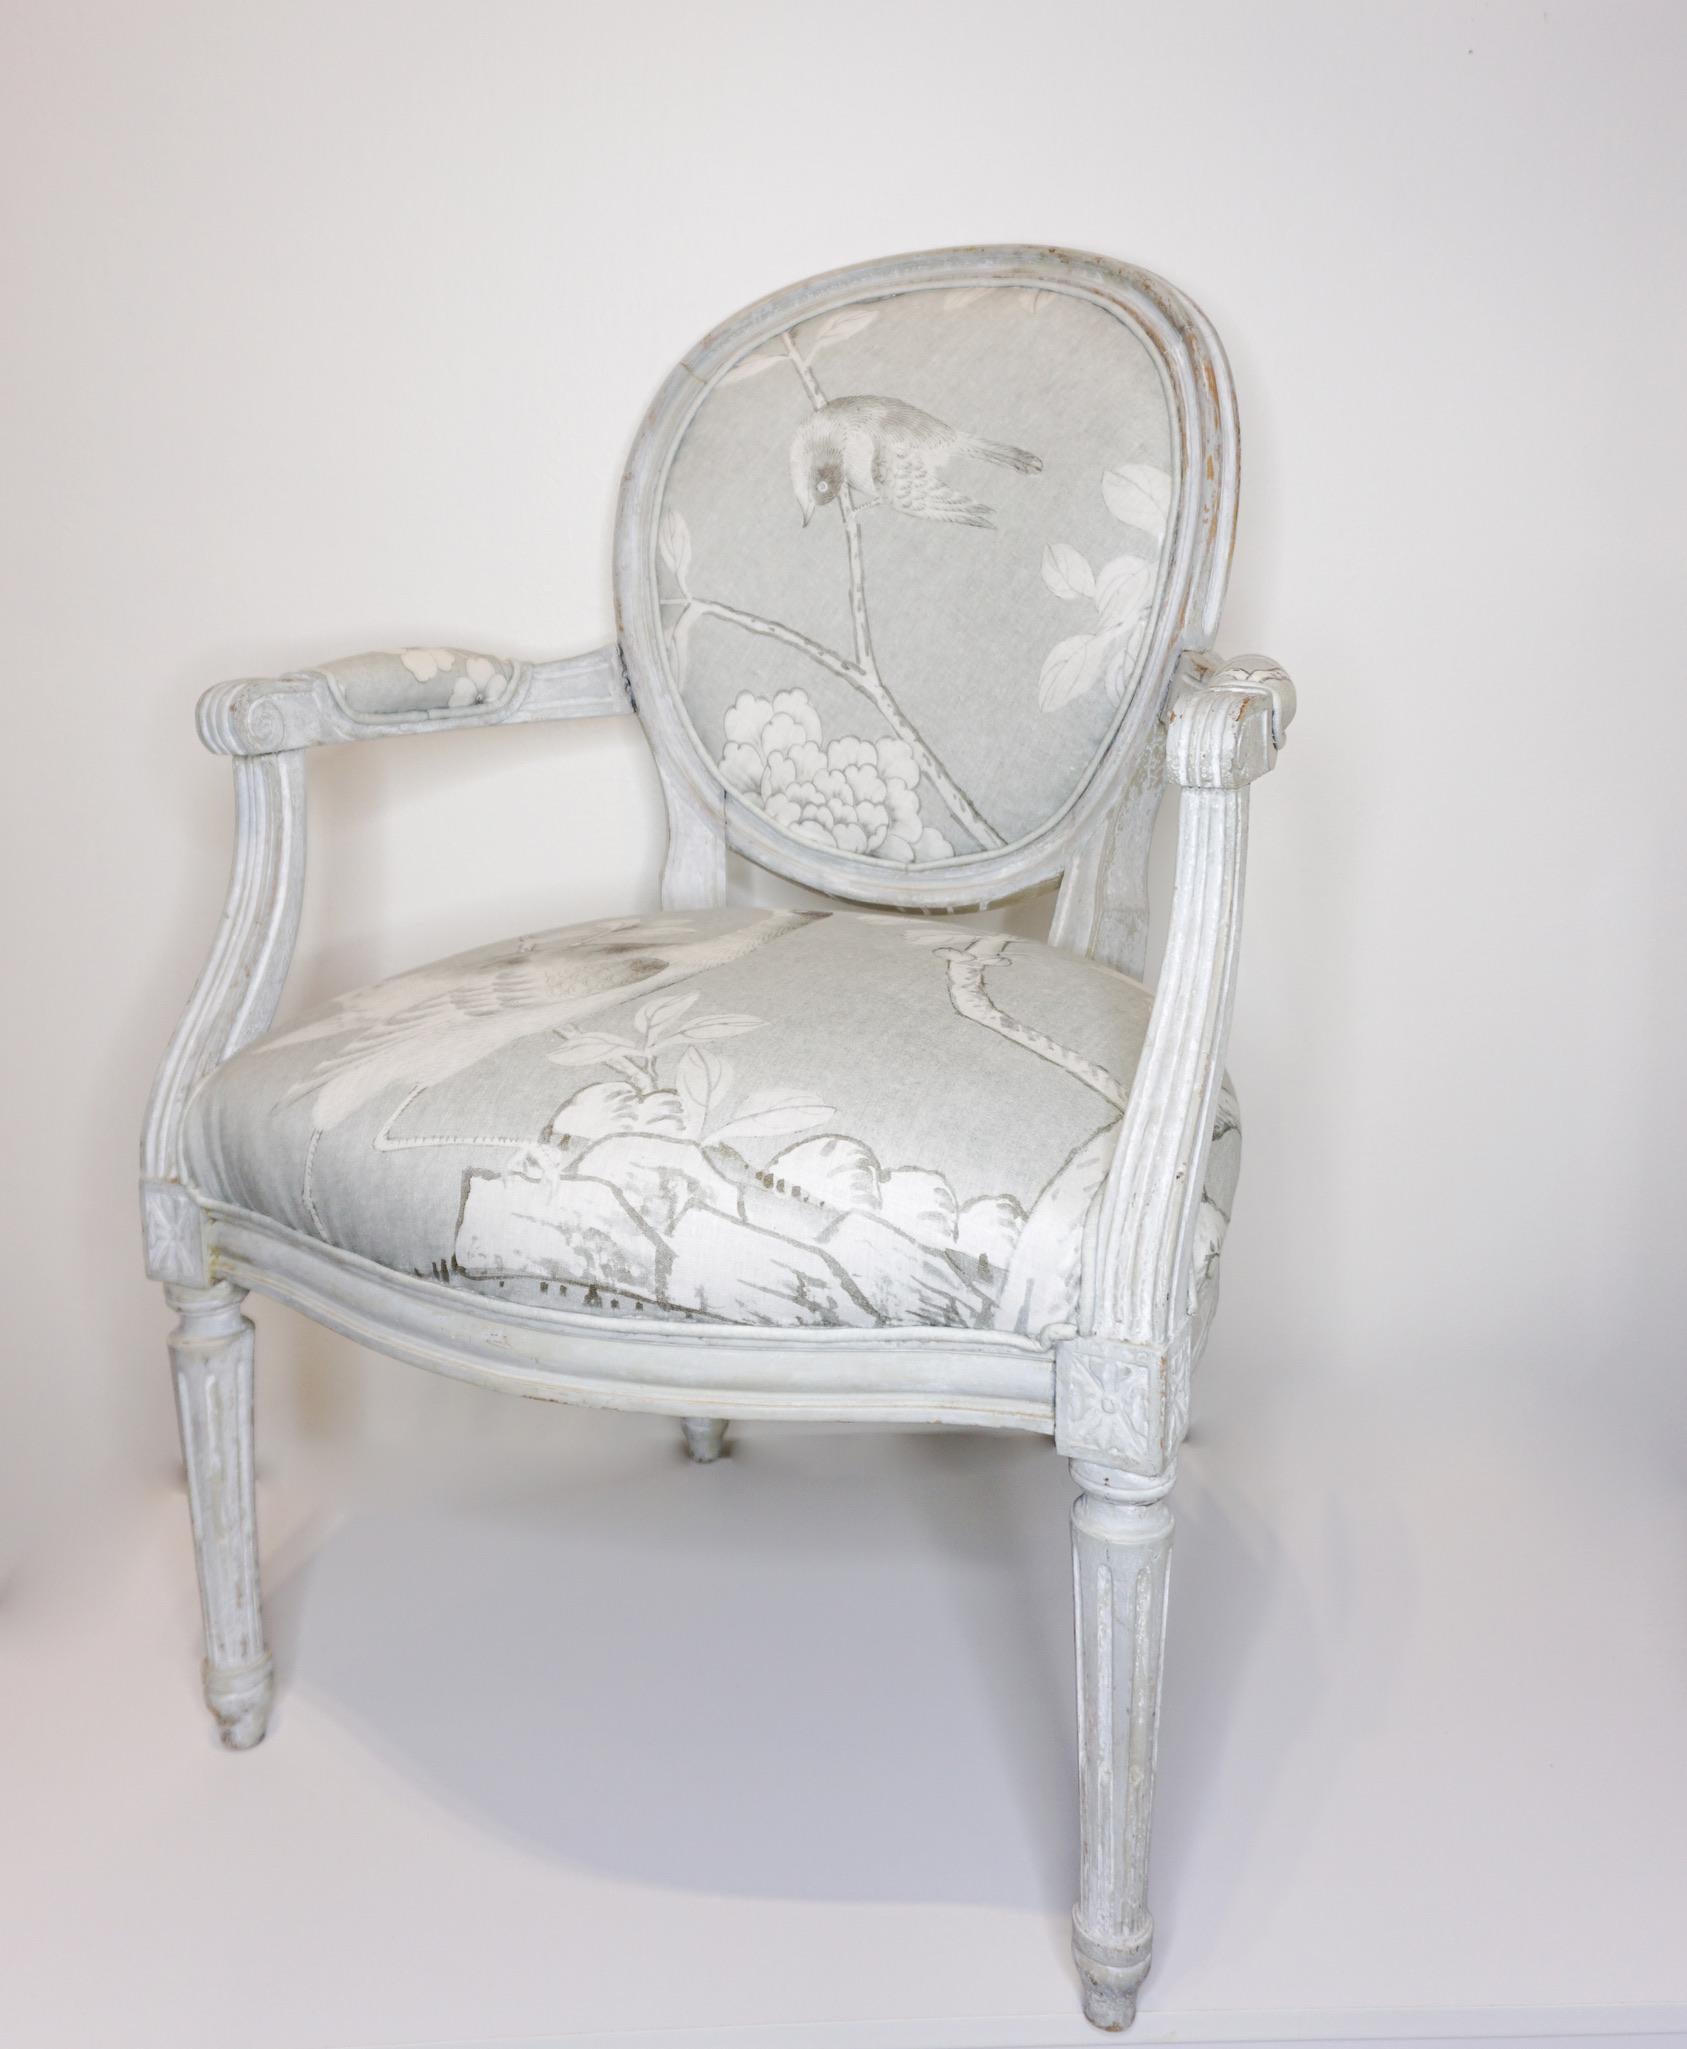 20th Century Early 1900's Louis XIV Style Chairs, Slipcovered in Manuel Canovas Fabric For Sale